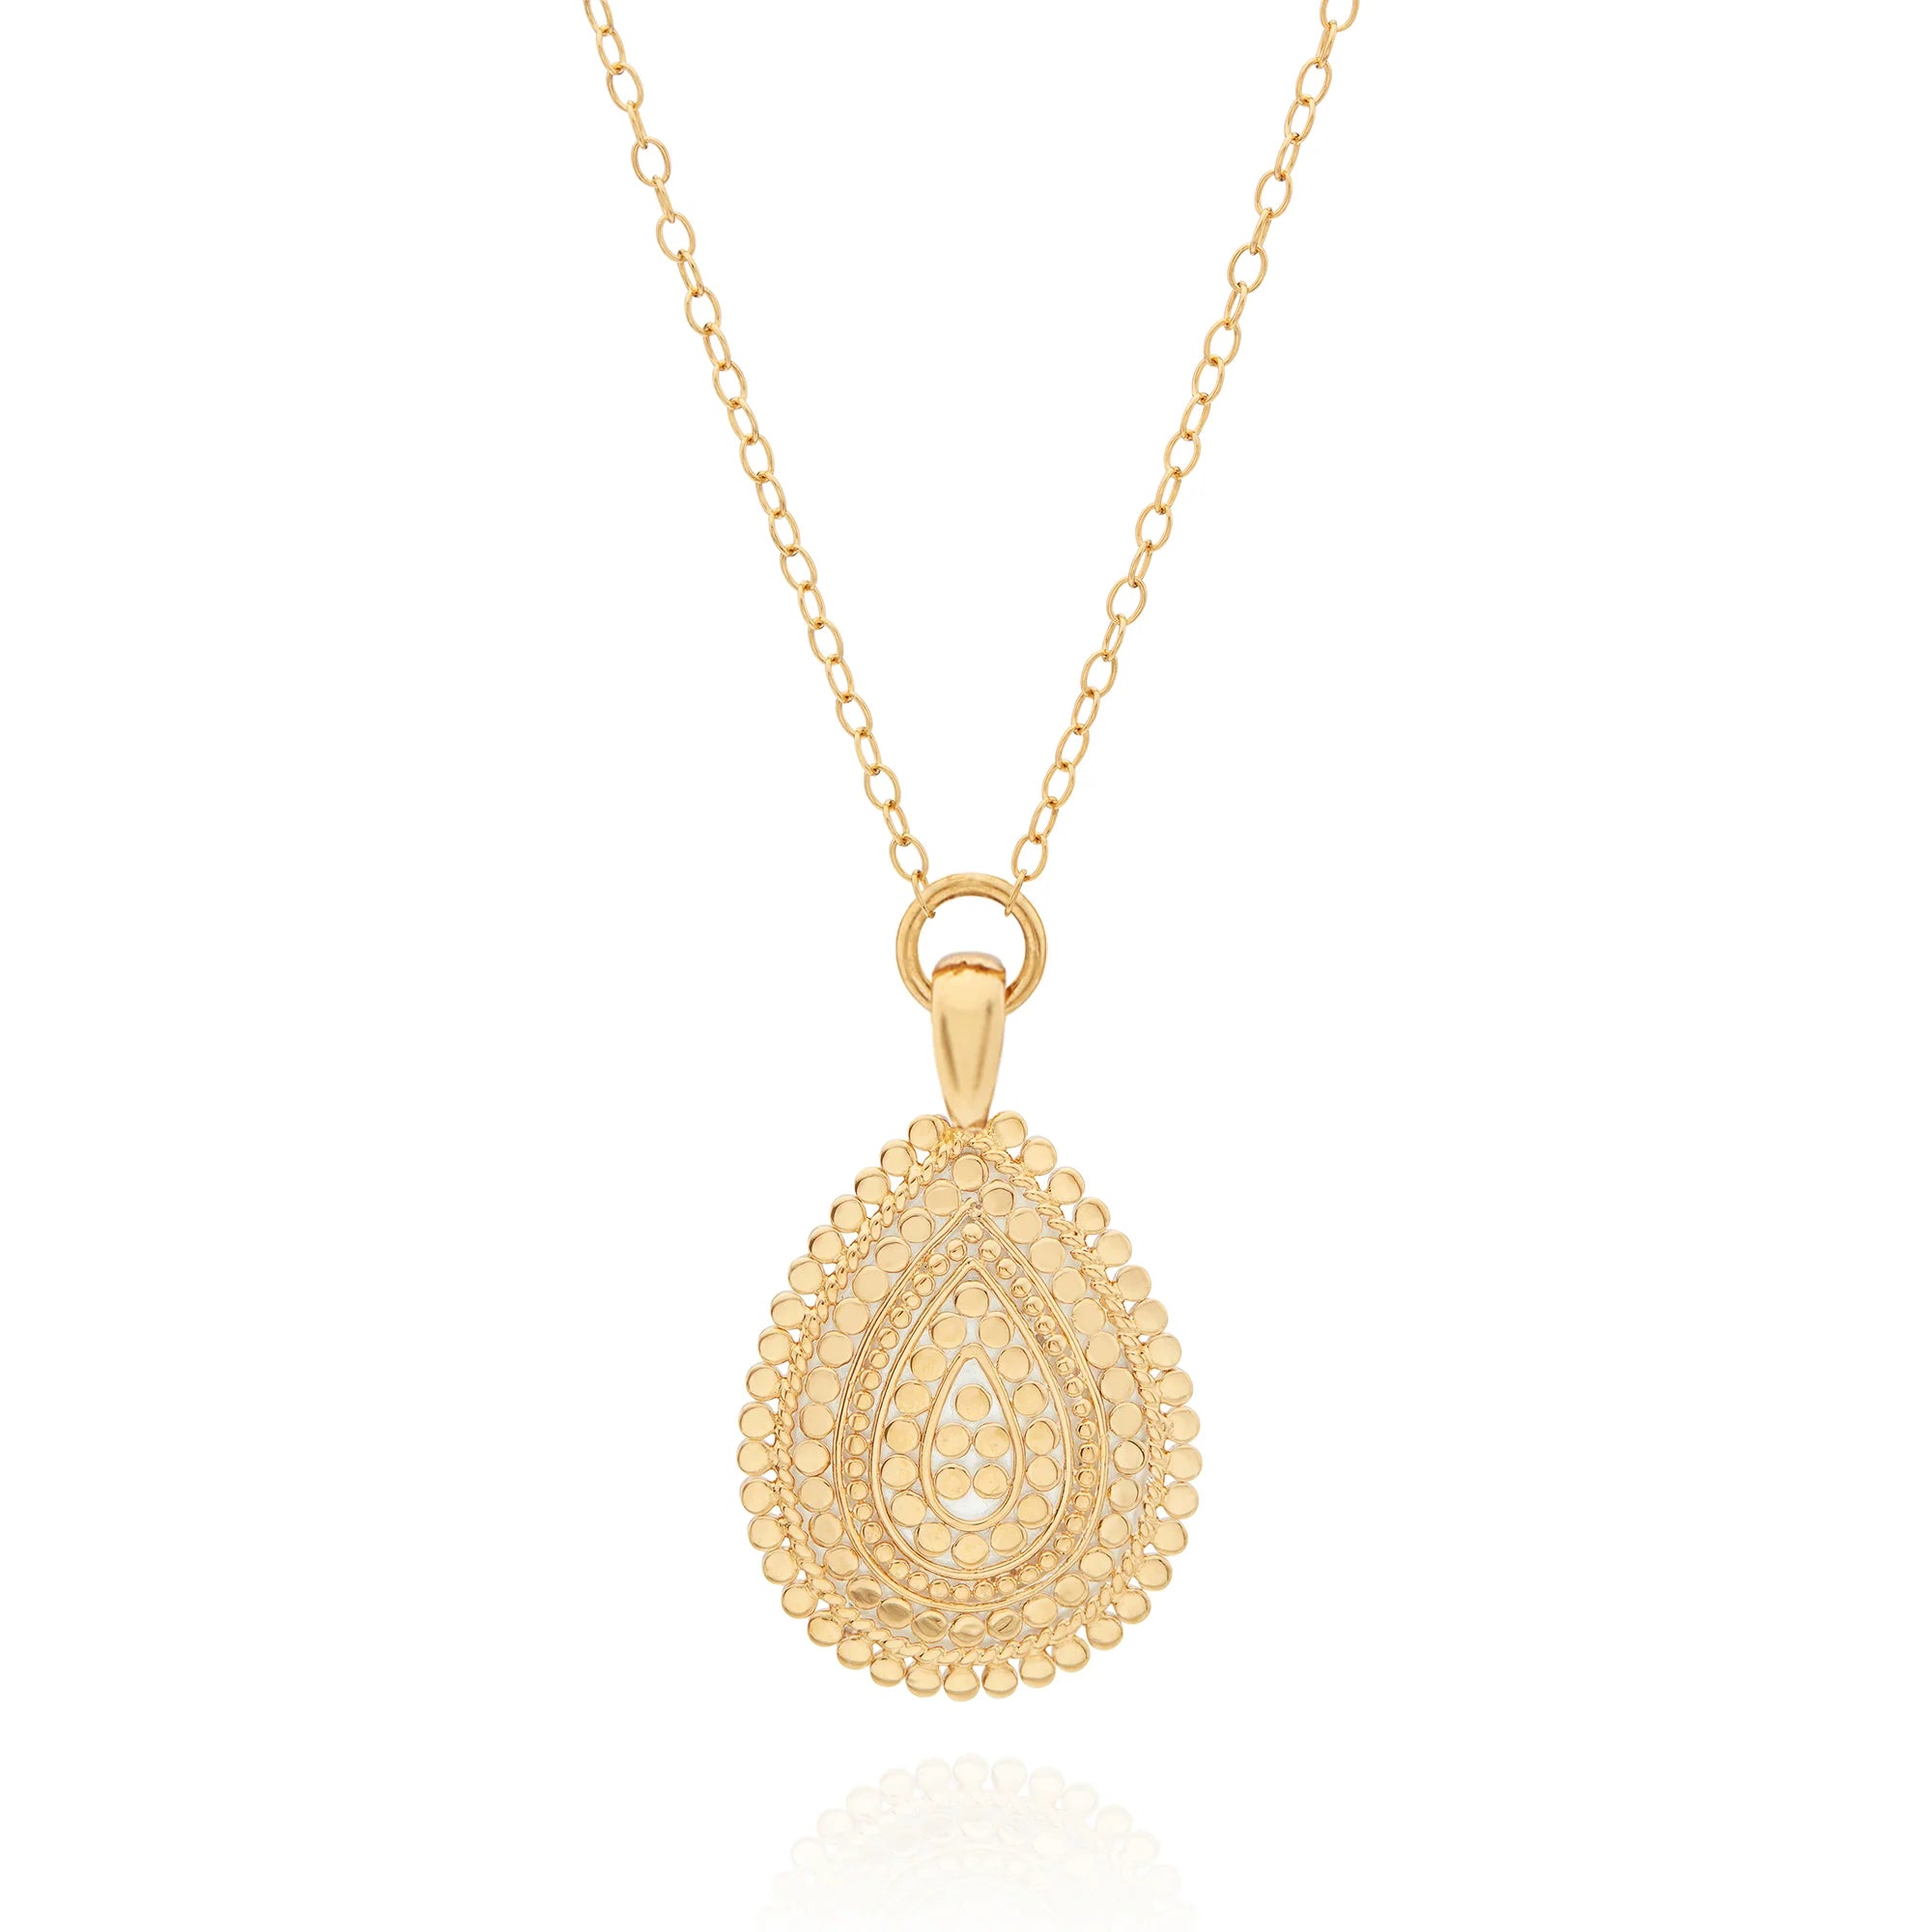 Teardrop shaped pendant gold necklace with gold dot details